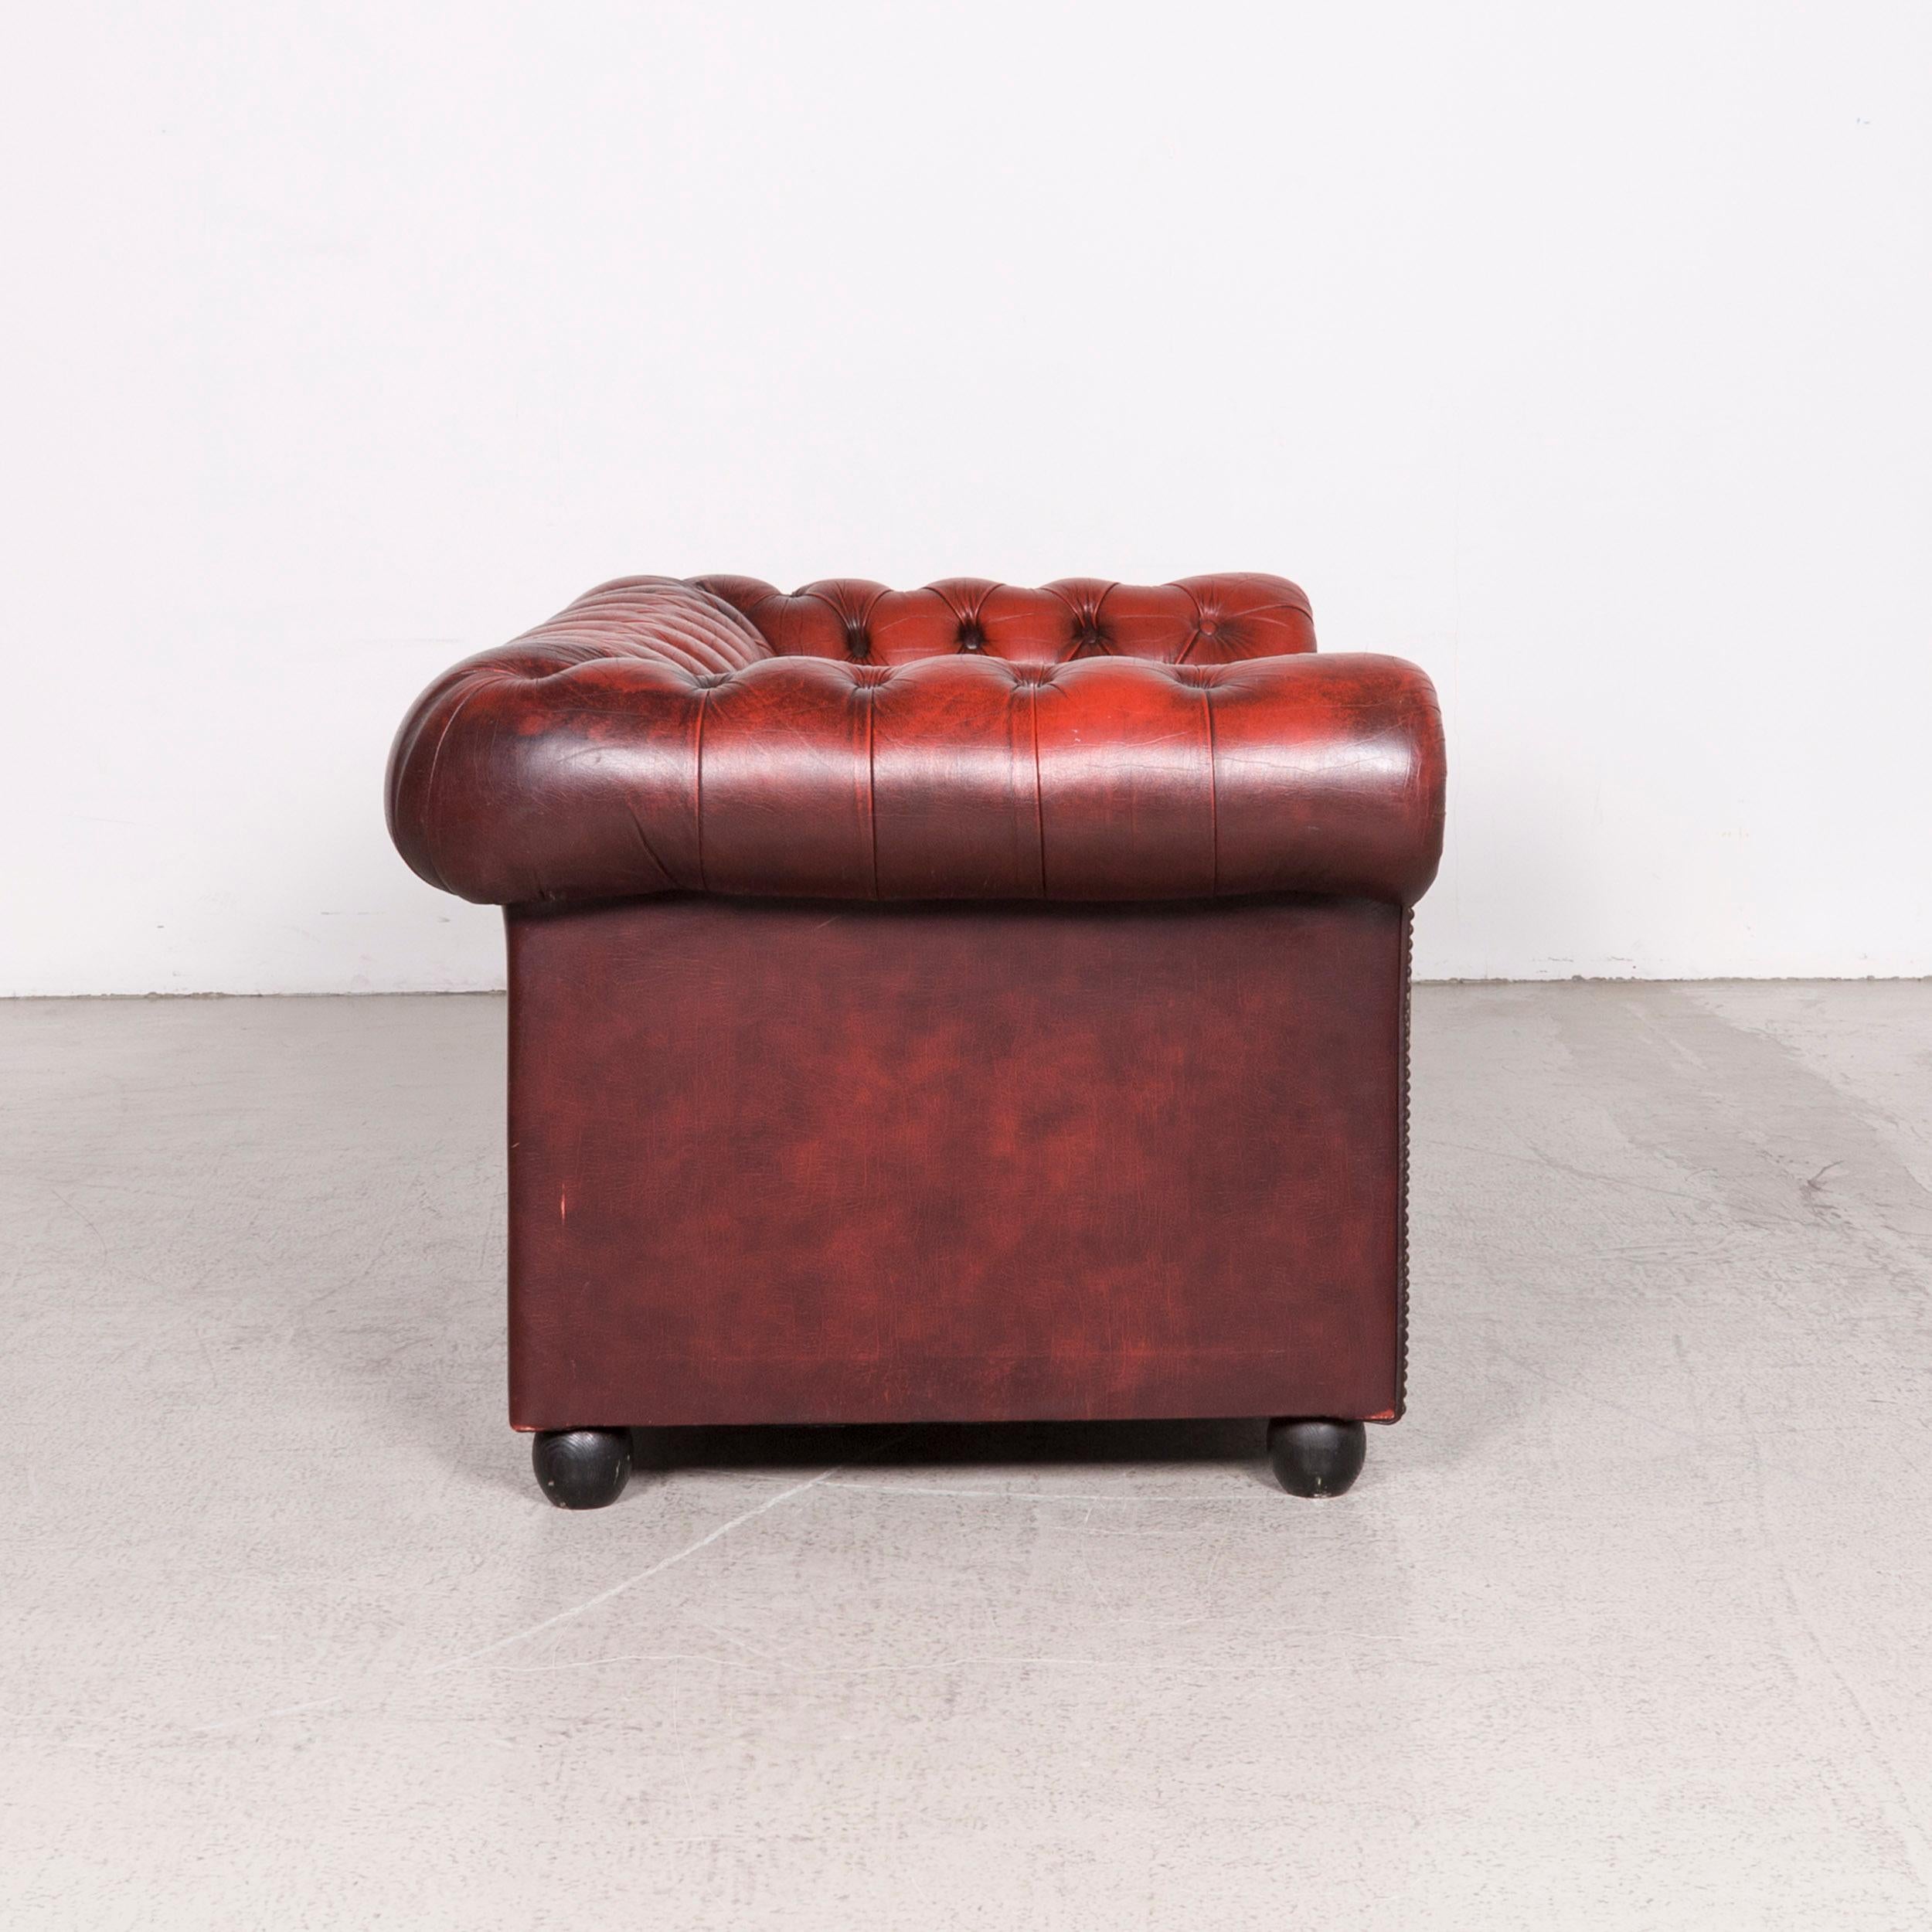 Chesterfield Designer Leather Sofa Red Two-Seat Genuine Leather Vintage Retro In Good Condition For Sale In Cologne, DE